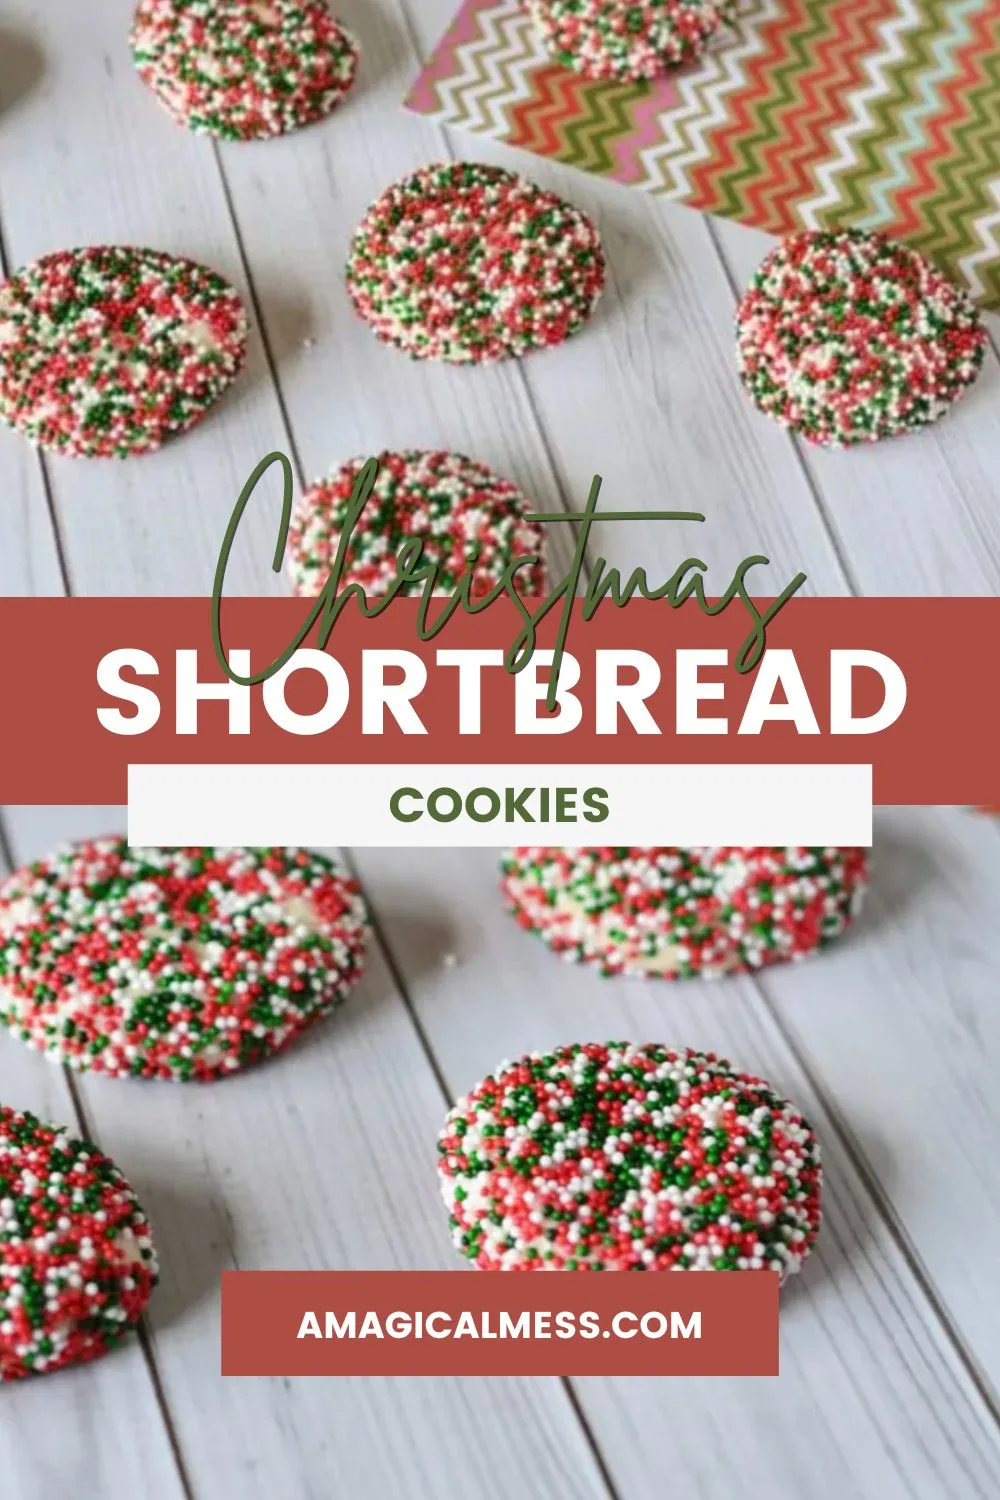 Little shortbread cookies covered in red and green nonpareils.